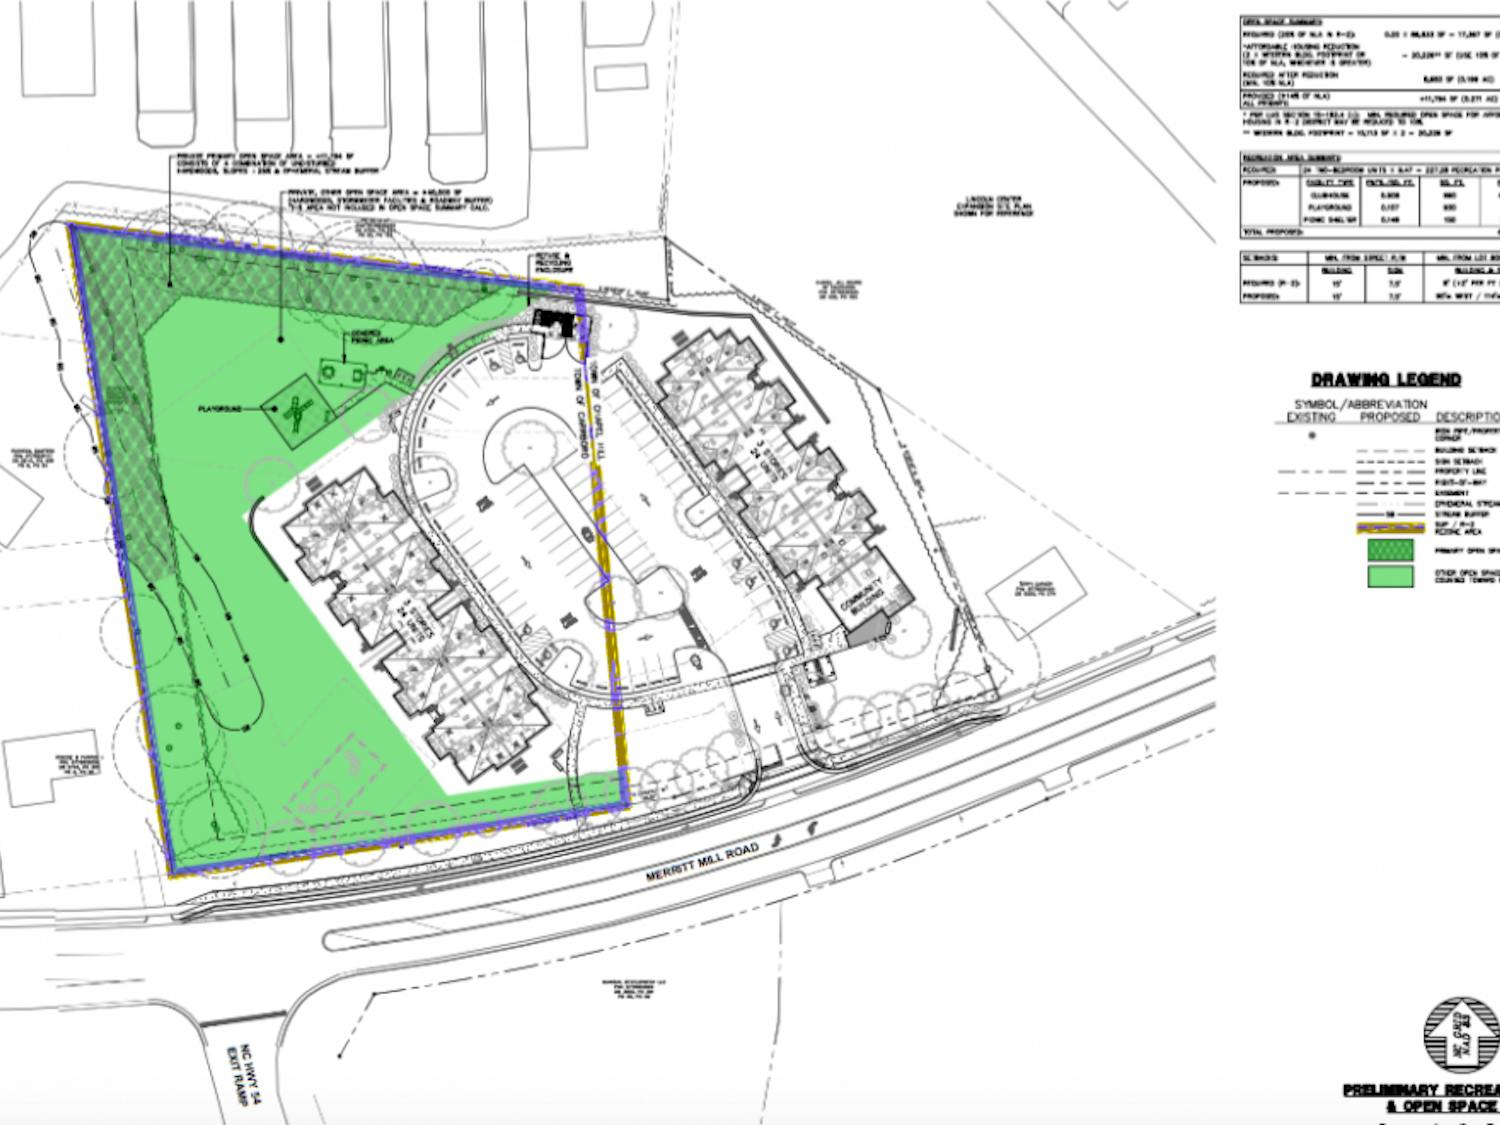 Layout of the affordable housing plans on South Merritt Mill Road. Photo courtesy of the Town of Carrboro.